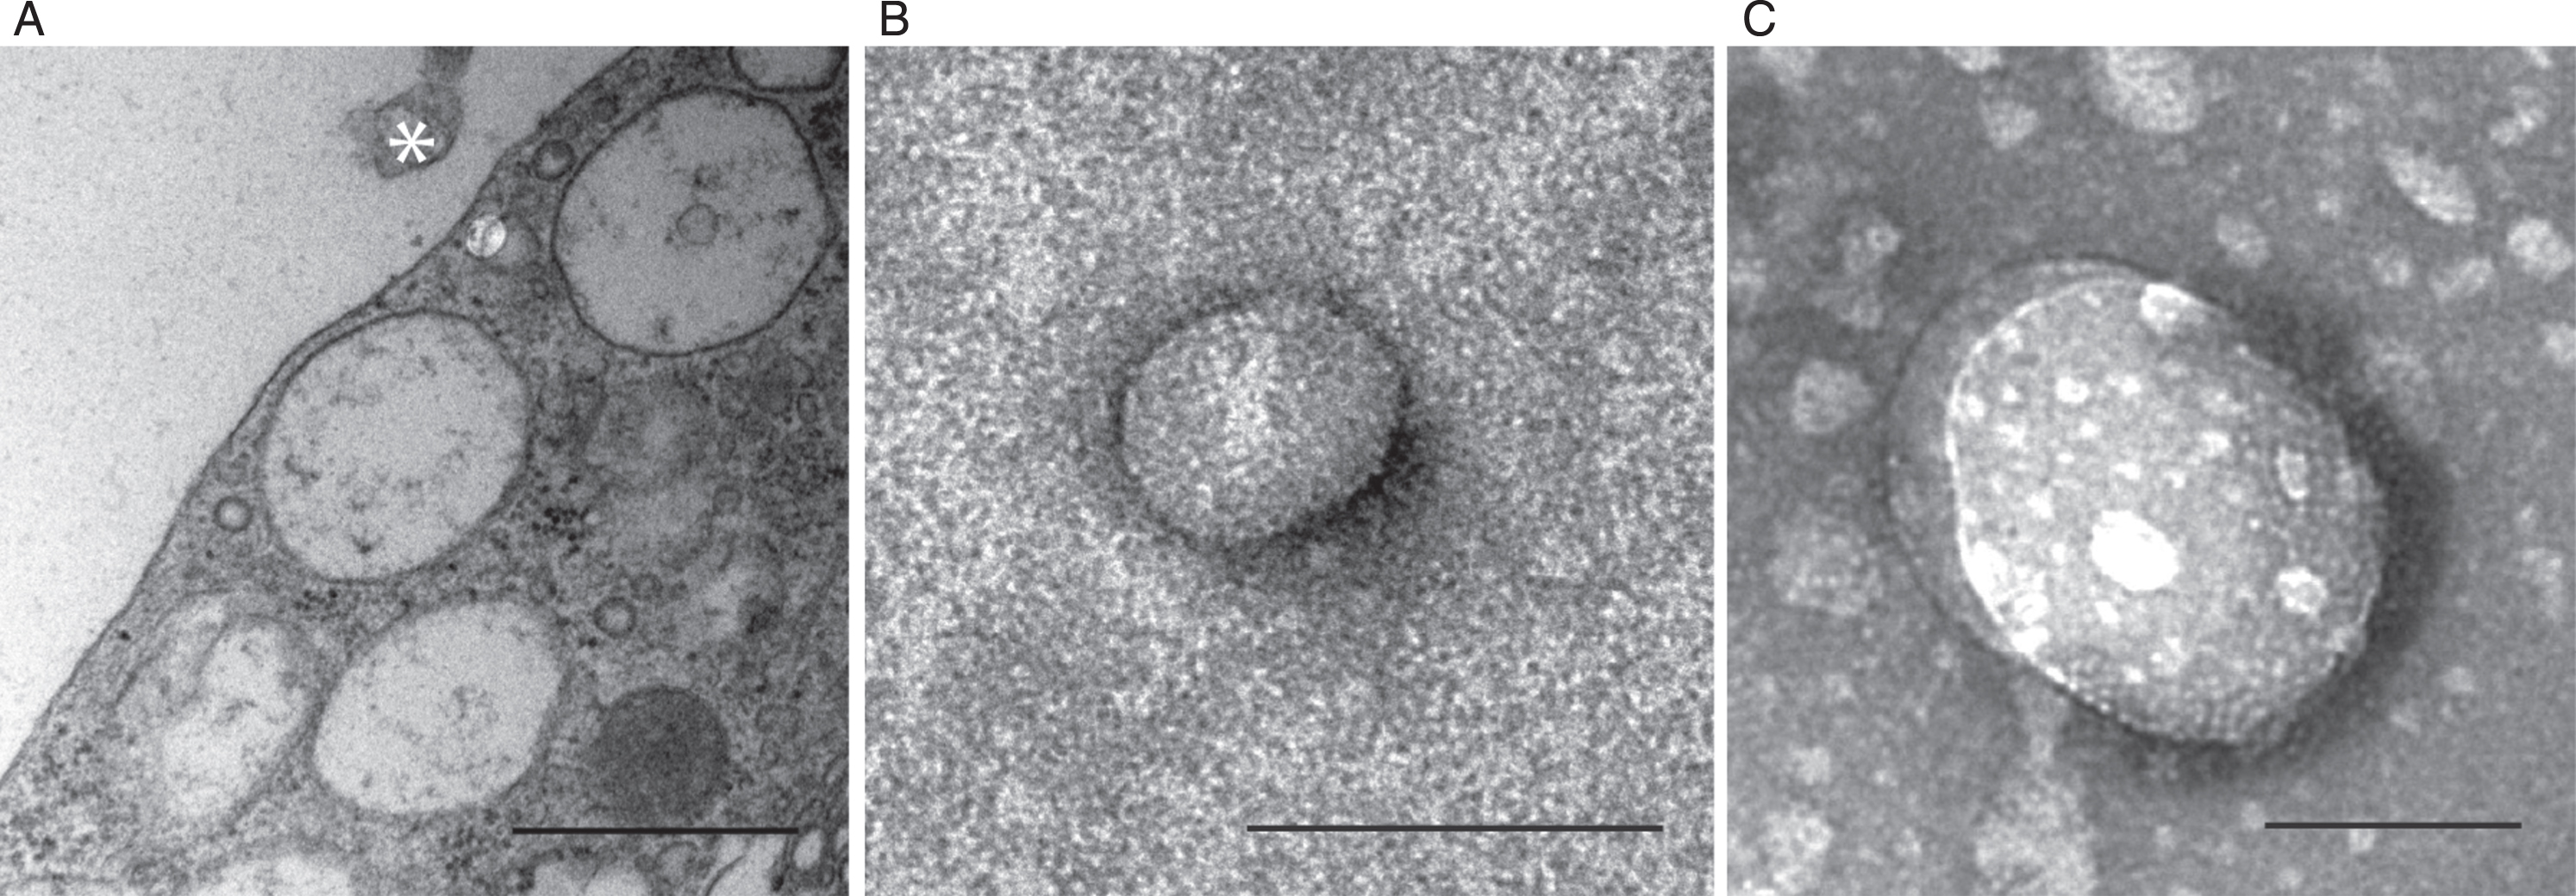 Secreted EVs can be successfully isolated from neuroglial co-cultures. Transmission electron microscopy confirming the presence of an EV (asterisk) in close proximity to multivesicular astrocytes (A). The EV preparation included smaller vesicles, such as exosomes (B) and larger MVs (C). The size of the exosomes ranged from 50–75 nm and the larger MVs were up to 400 nm in diameter. Scale bars: A = 1μm, B-C = 100 nm.